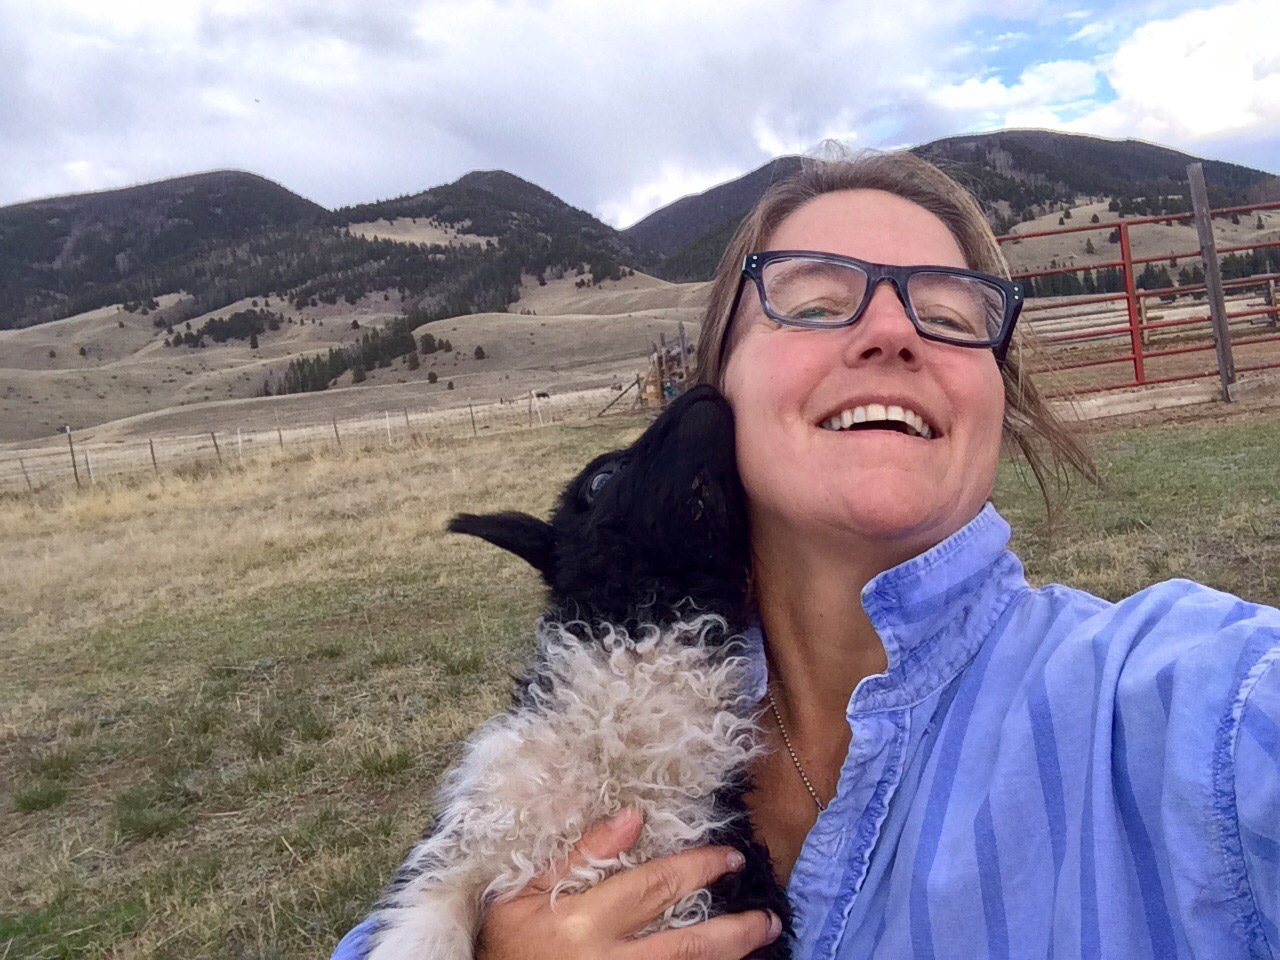 View of a happy woman holding a little sheep